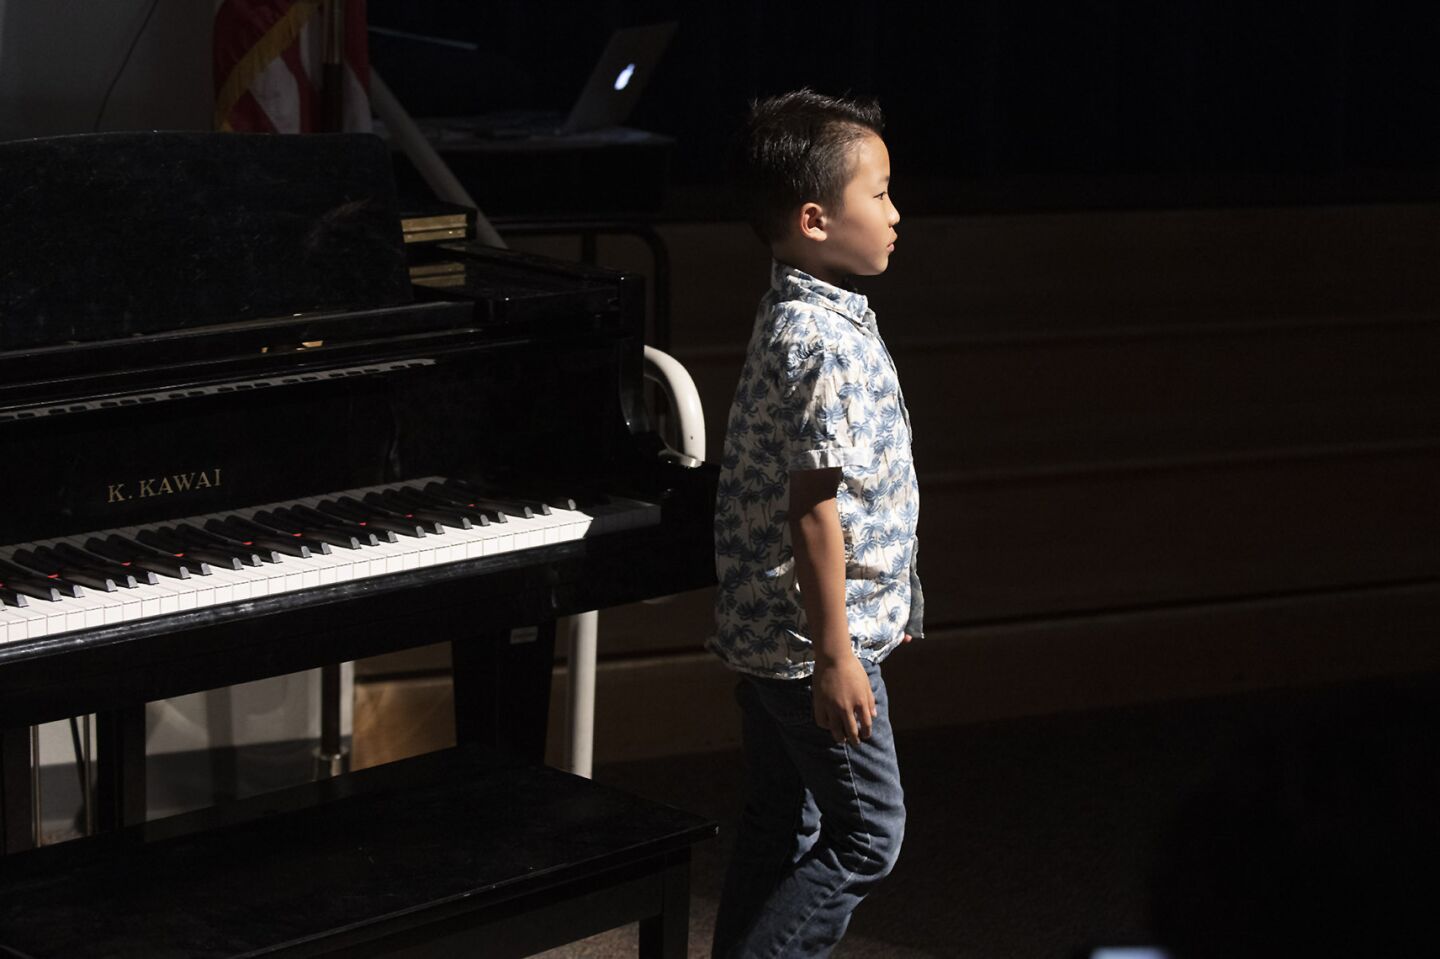 Kaiden Lee played "Shallow" on the piano